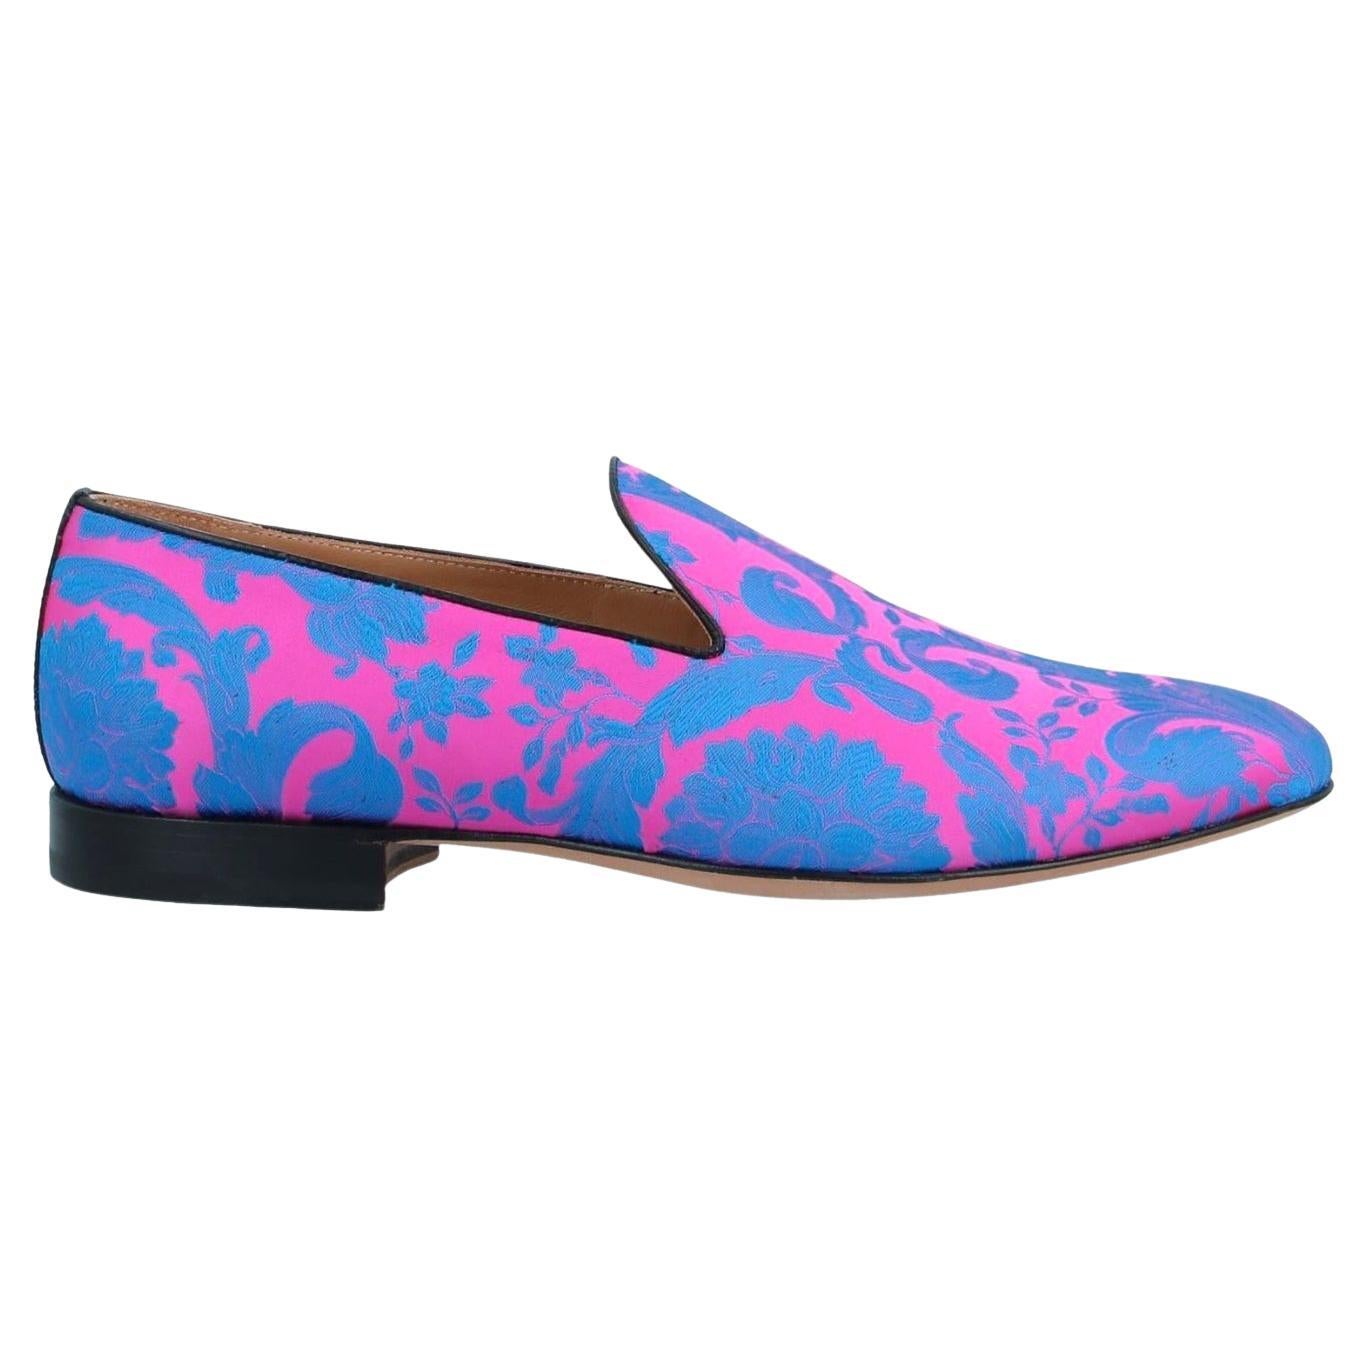 New VERSACE SATIN BAROQUE LOAFERS SHOES in BLUE and PINK 